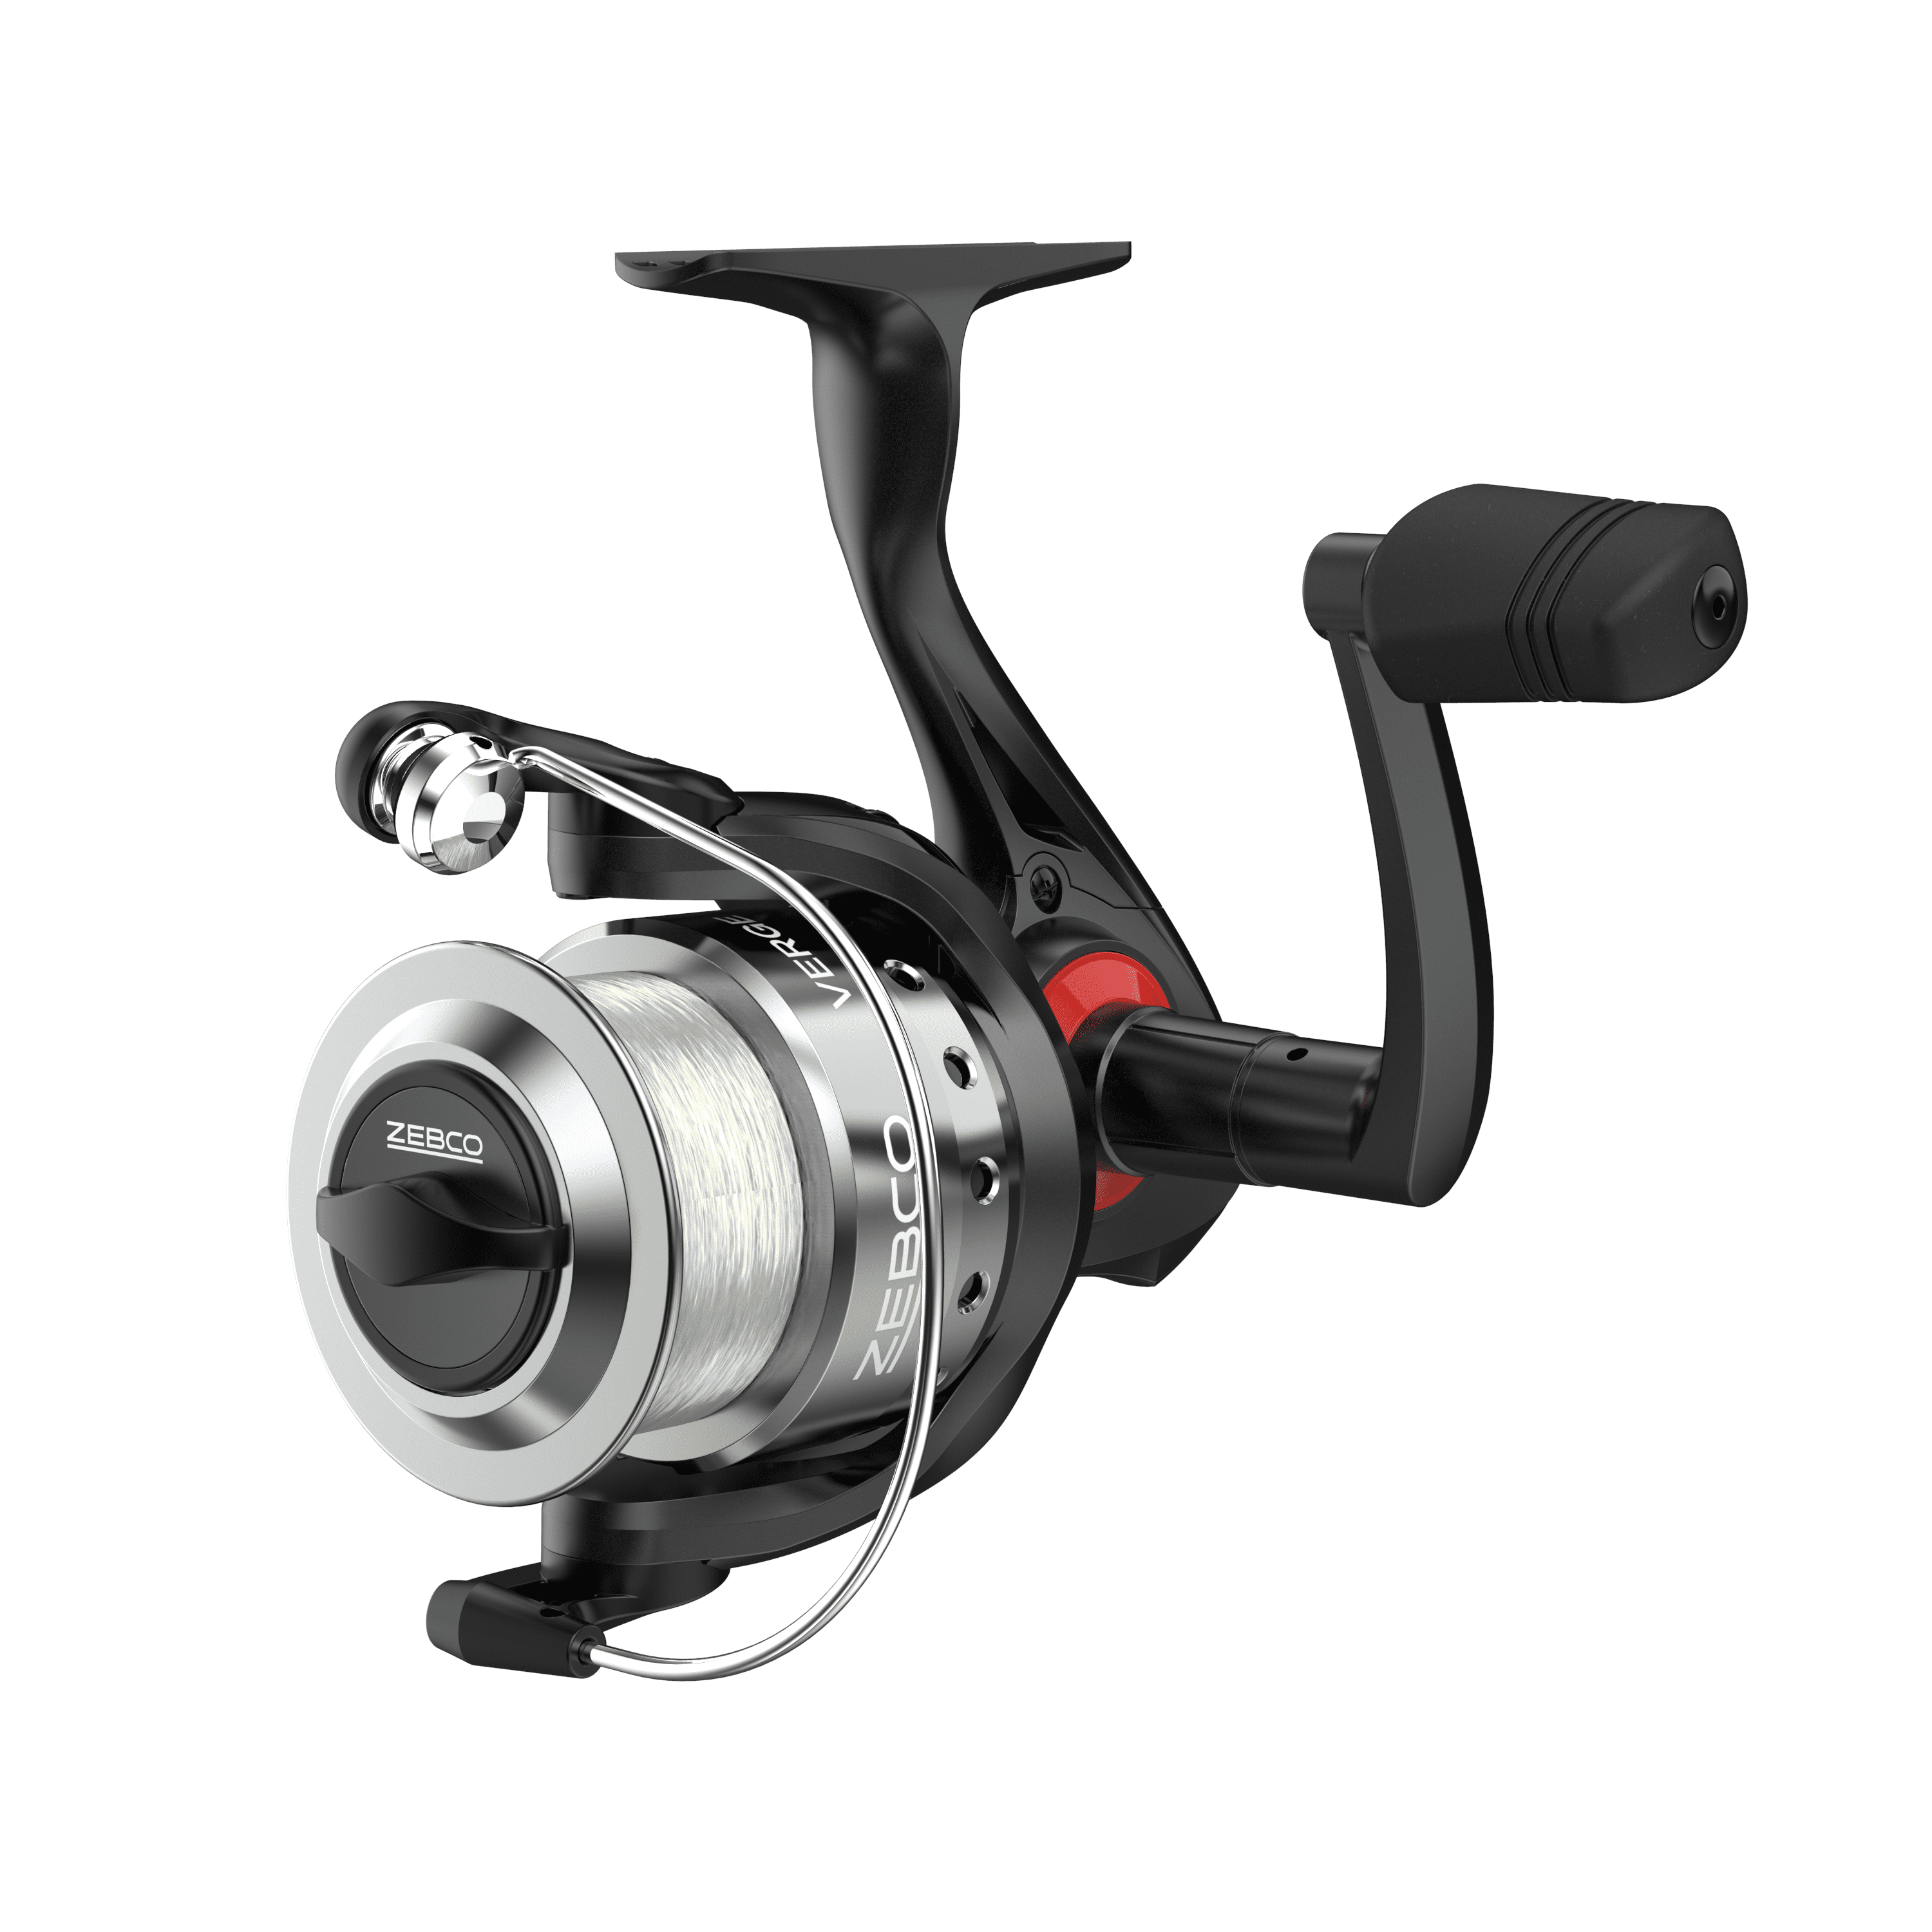 Zebco Verge Spinning Fishing Reel, Size 30 Reel, Changeable Right- or  Left-Hand Retrieve, Pre-Spooled with 10-Pound Zebco Fishing Line, All-Metal